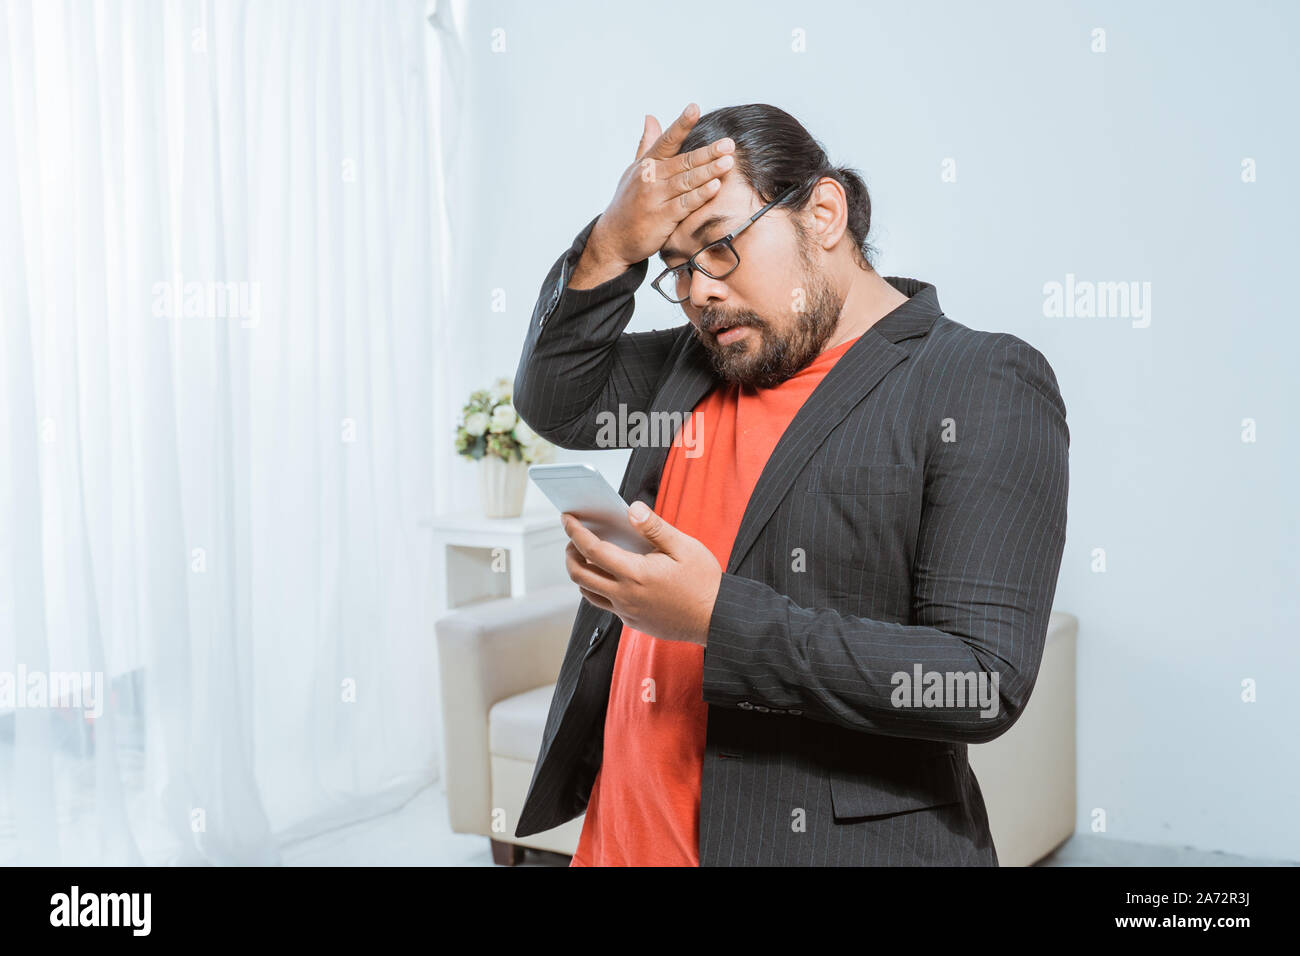 disapointed businessman receiving text message on his smartphone Stock Photo